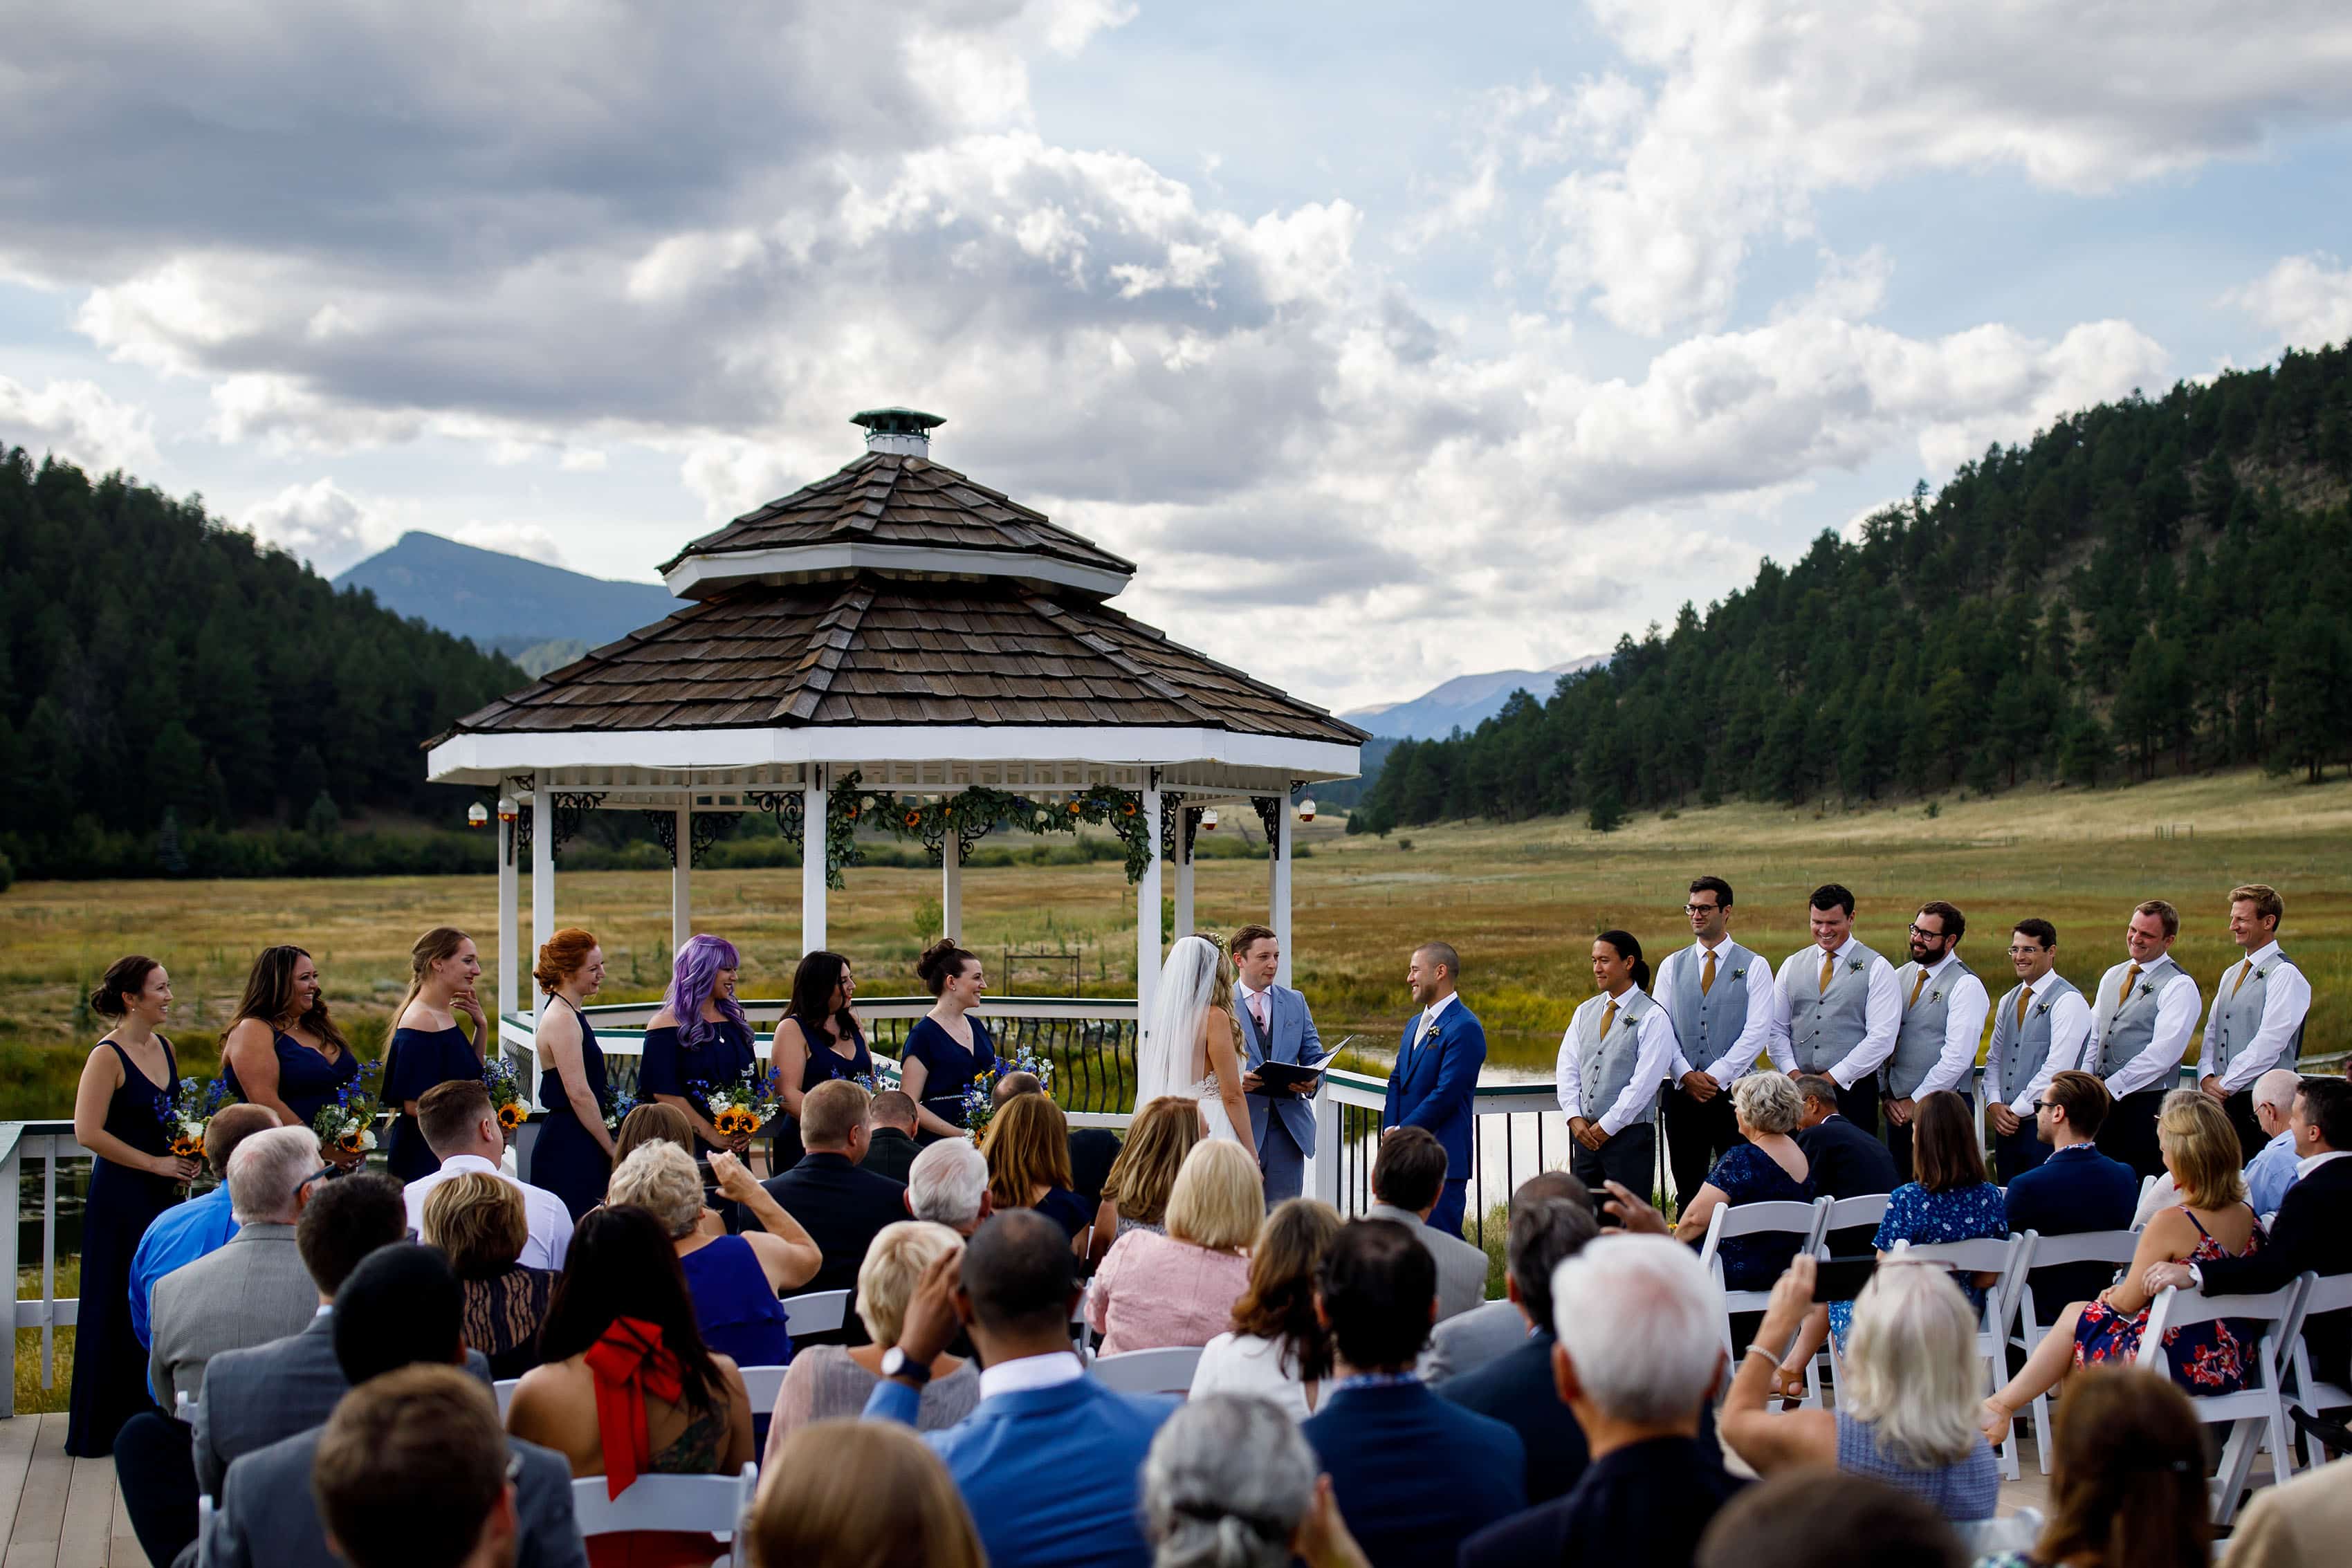 The ceremony takes place at the gazebo during a summer wedding at Deer Creek Valley Ranch